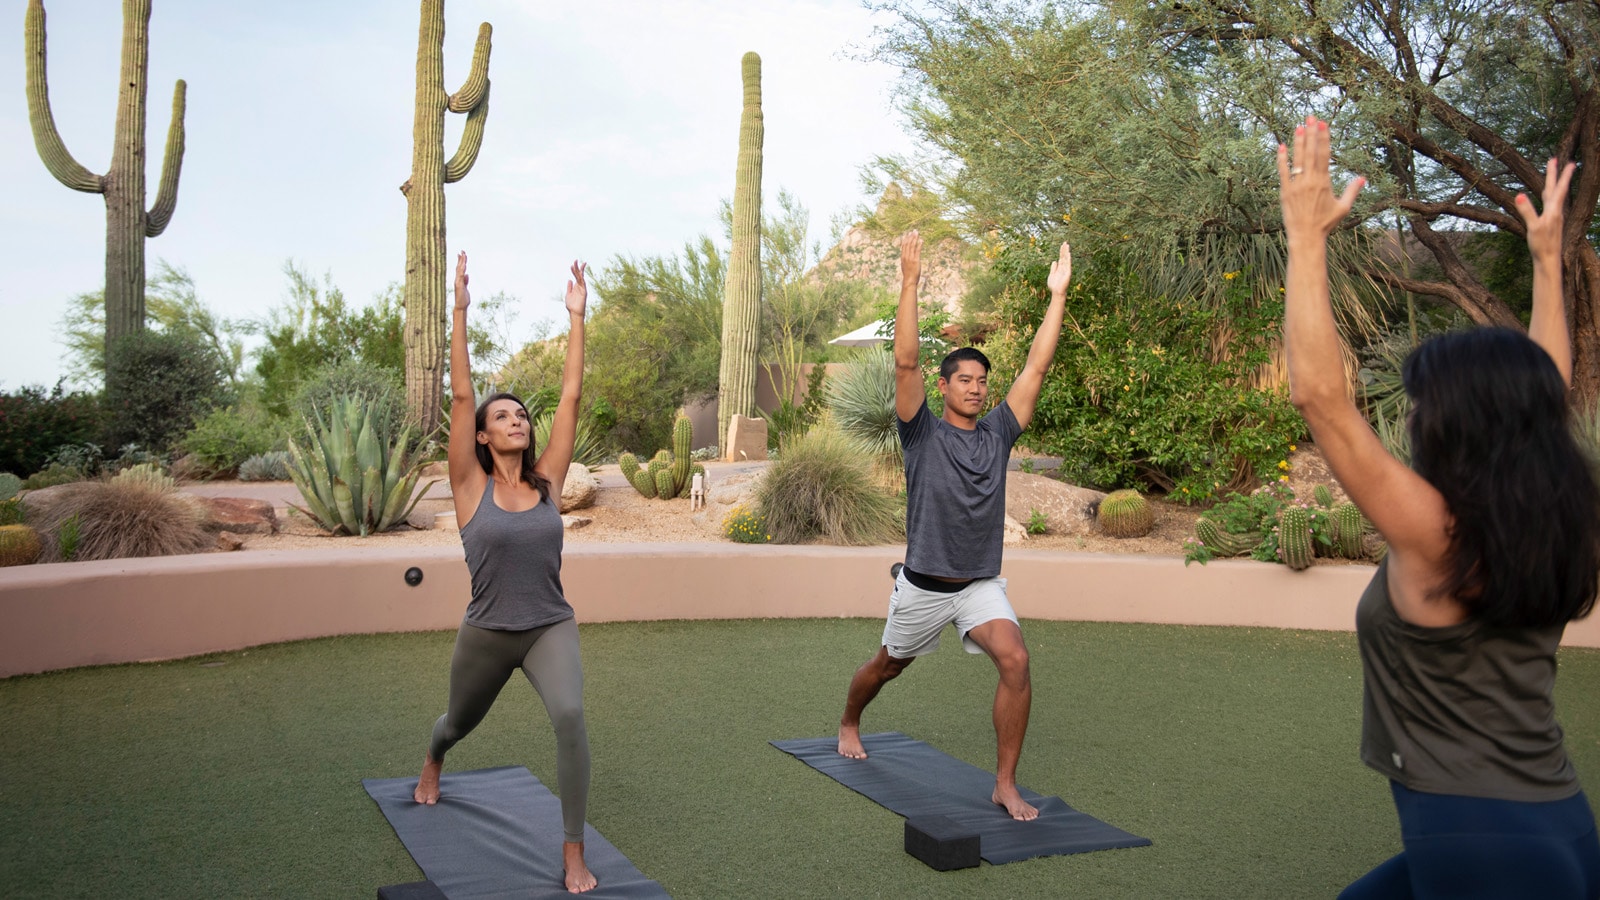 Scottsdale Troon North Outdoor Fitness Options